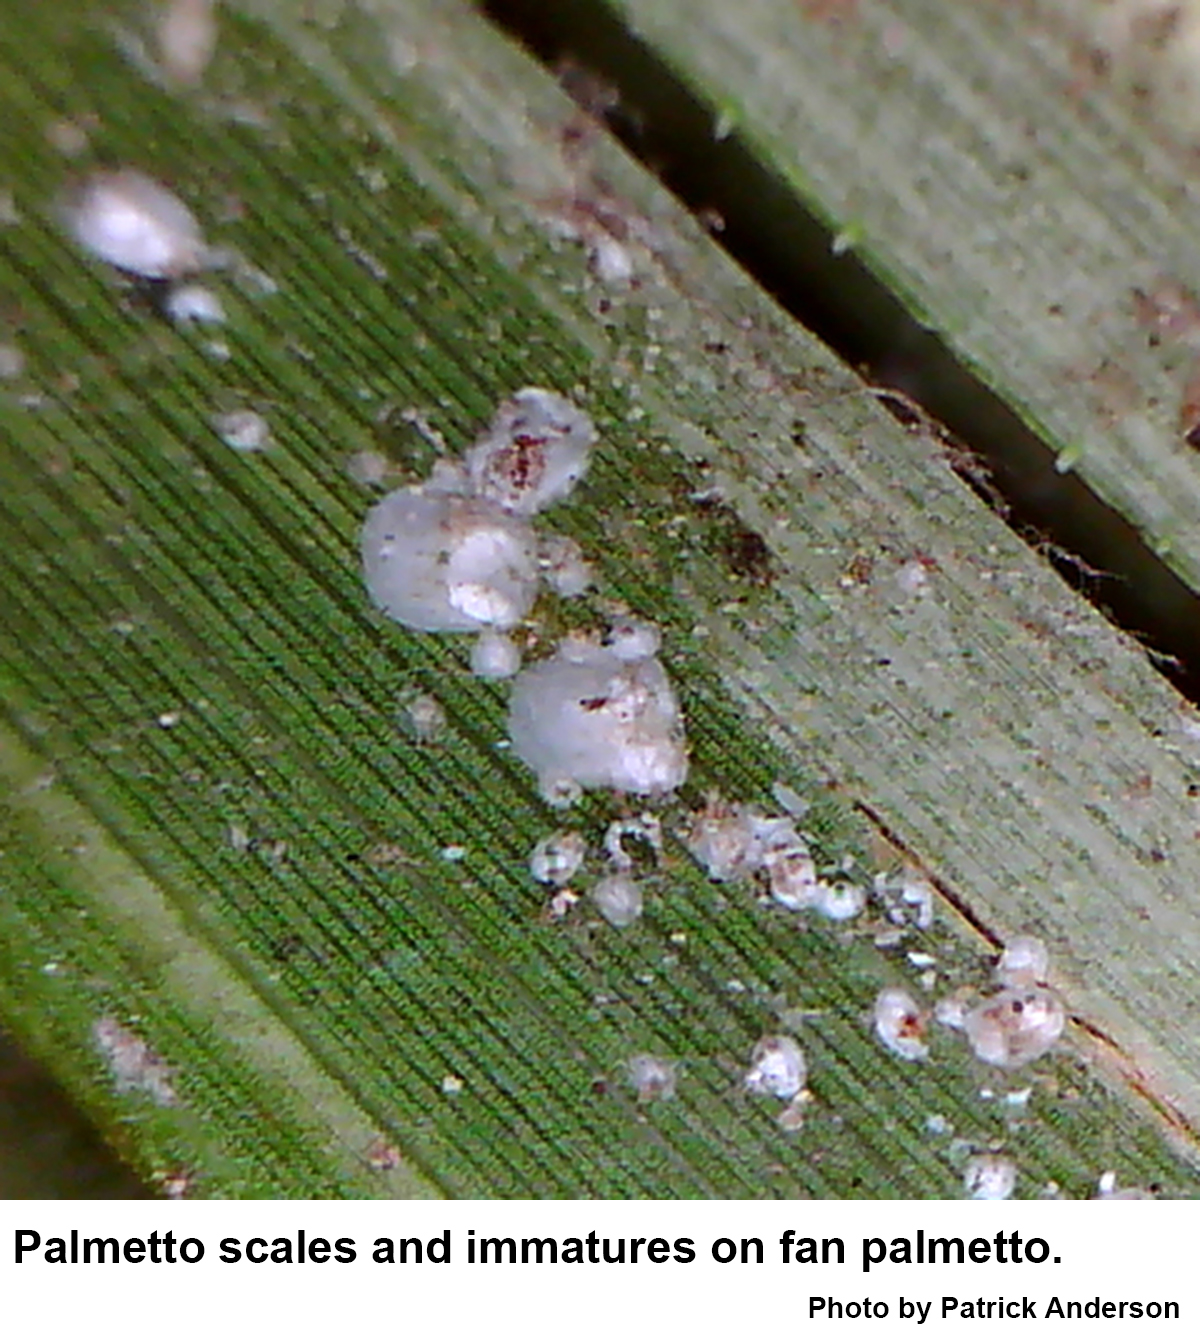 Palmetto scale insects infest most ornamental palms.